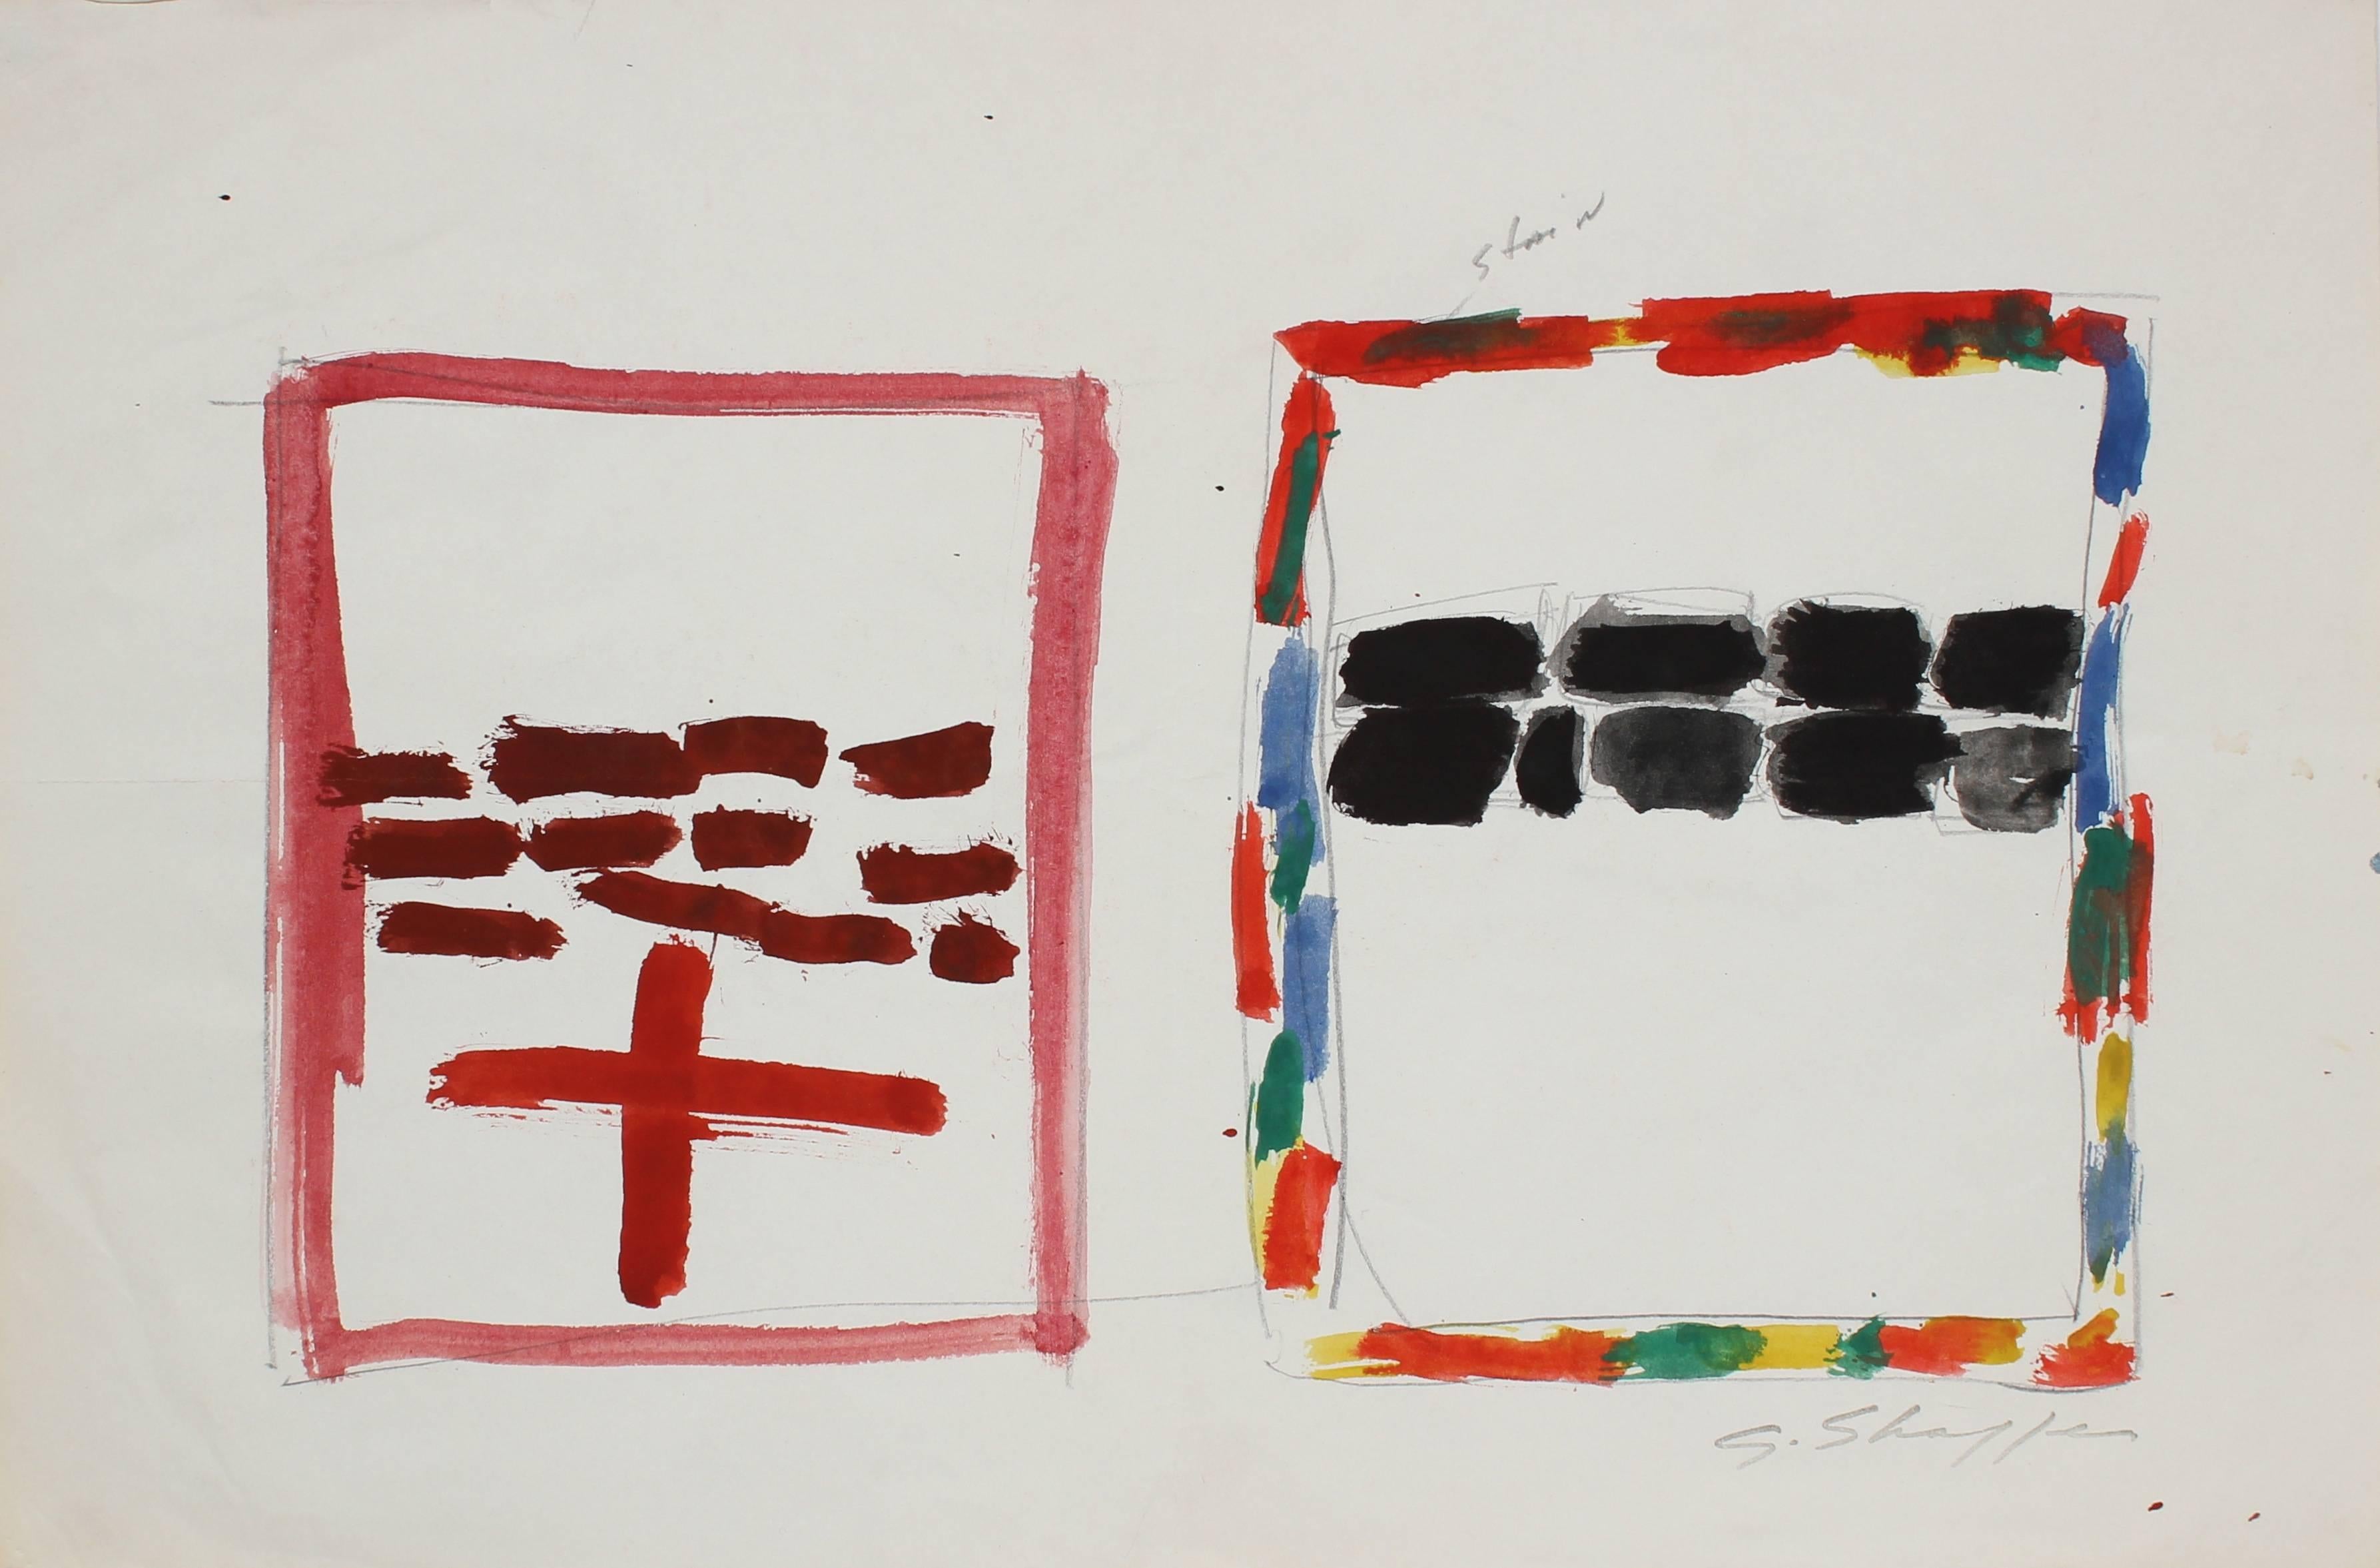 Bright Abstracted Squares in Gouache Paint, Circa 1970